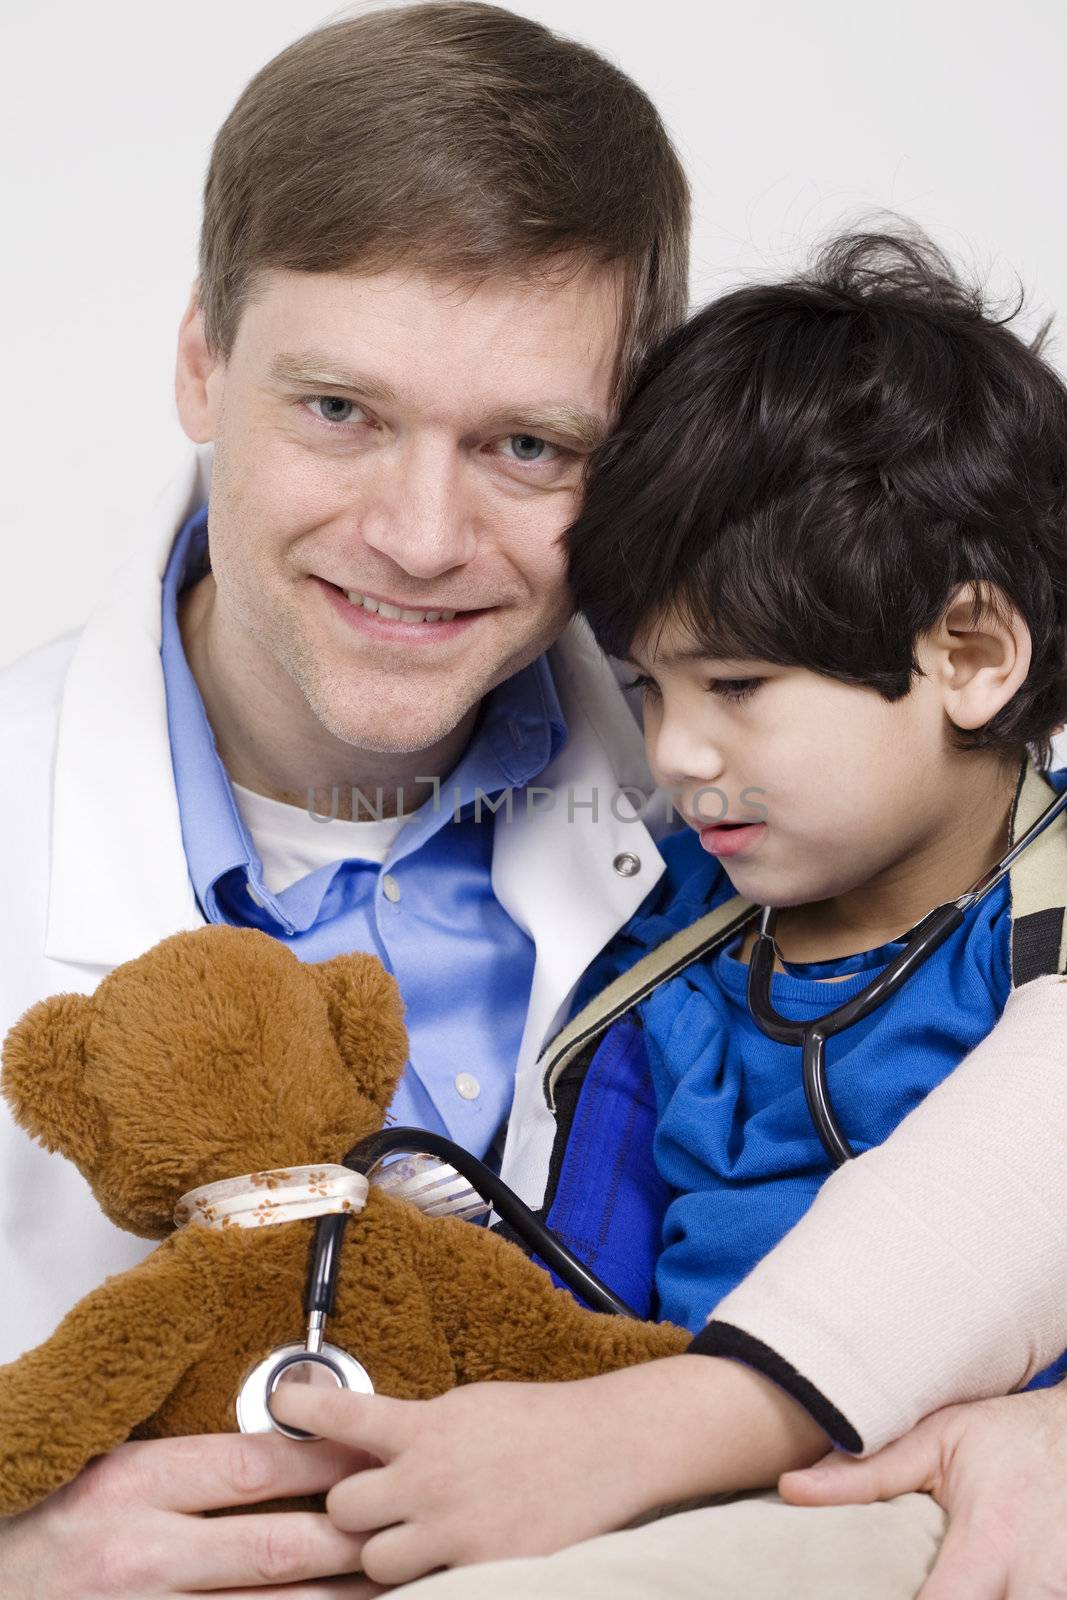 Friendly doctor playing with five year old disabled patient during office visit by playing with teddy bear doll together